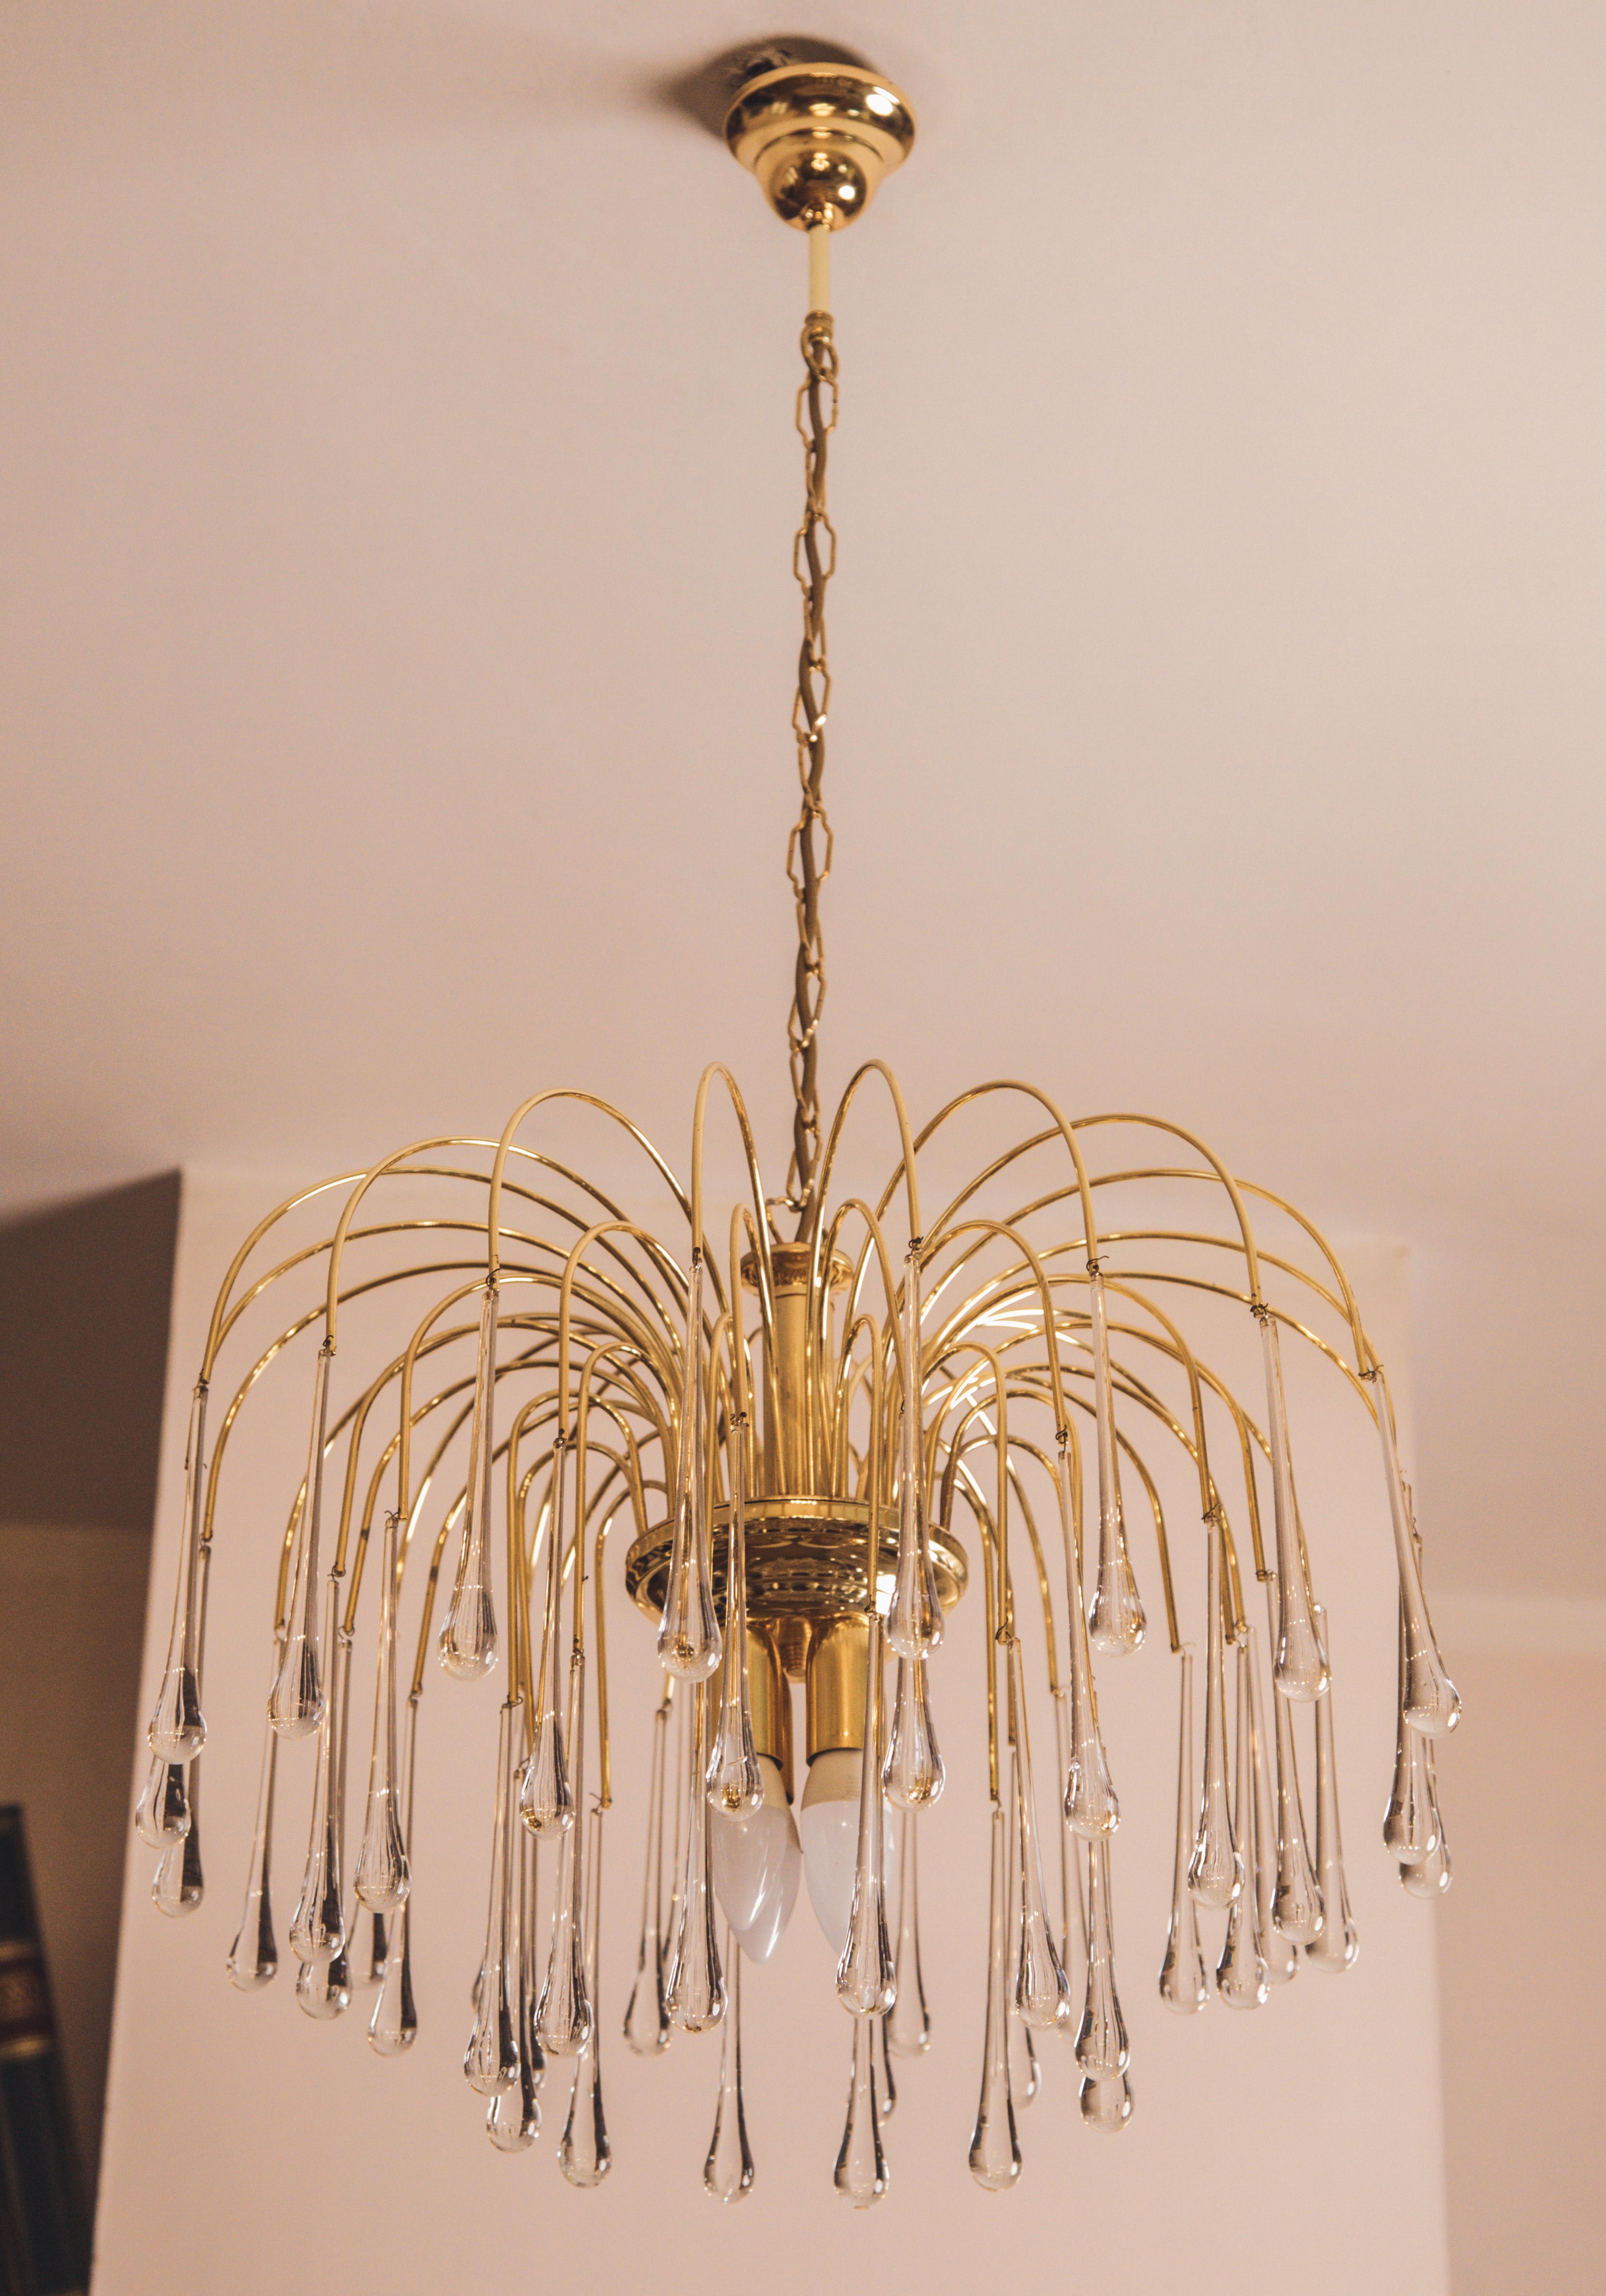 Stunning Murano chandelier in the style of Venini La Cascata.
The chandelier consists of three laps composed of beautiful transparent white drops cascading down.
The chandelier consists of 4 e14 light points.
The height of the chandelier measures